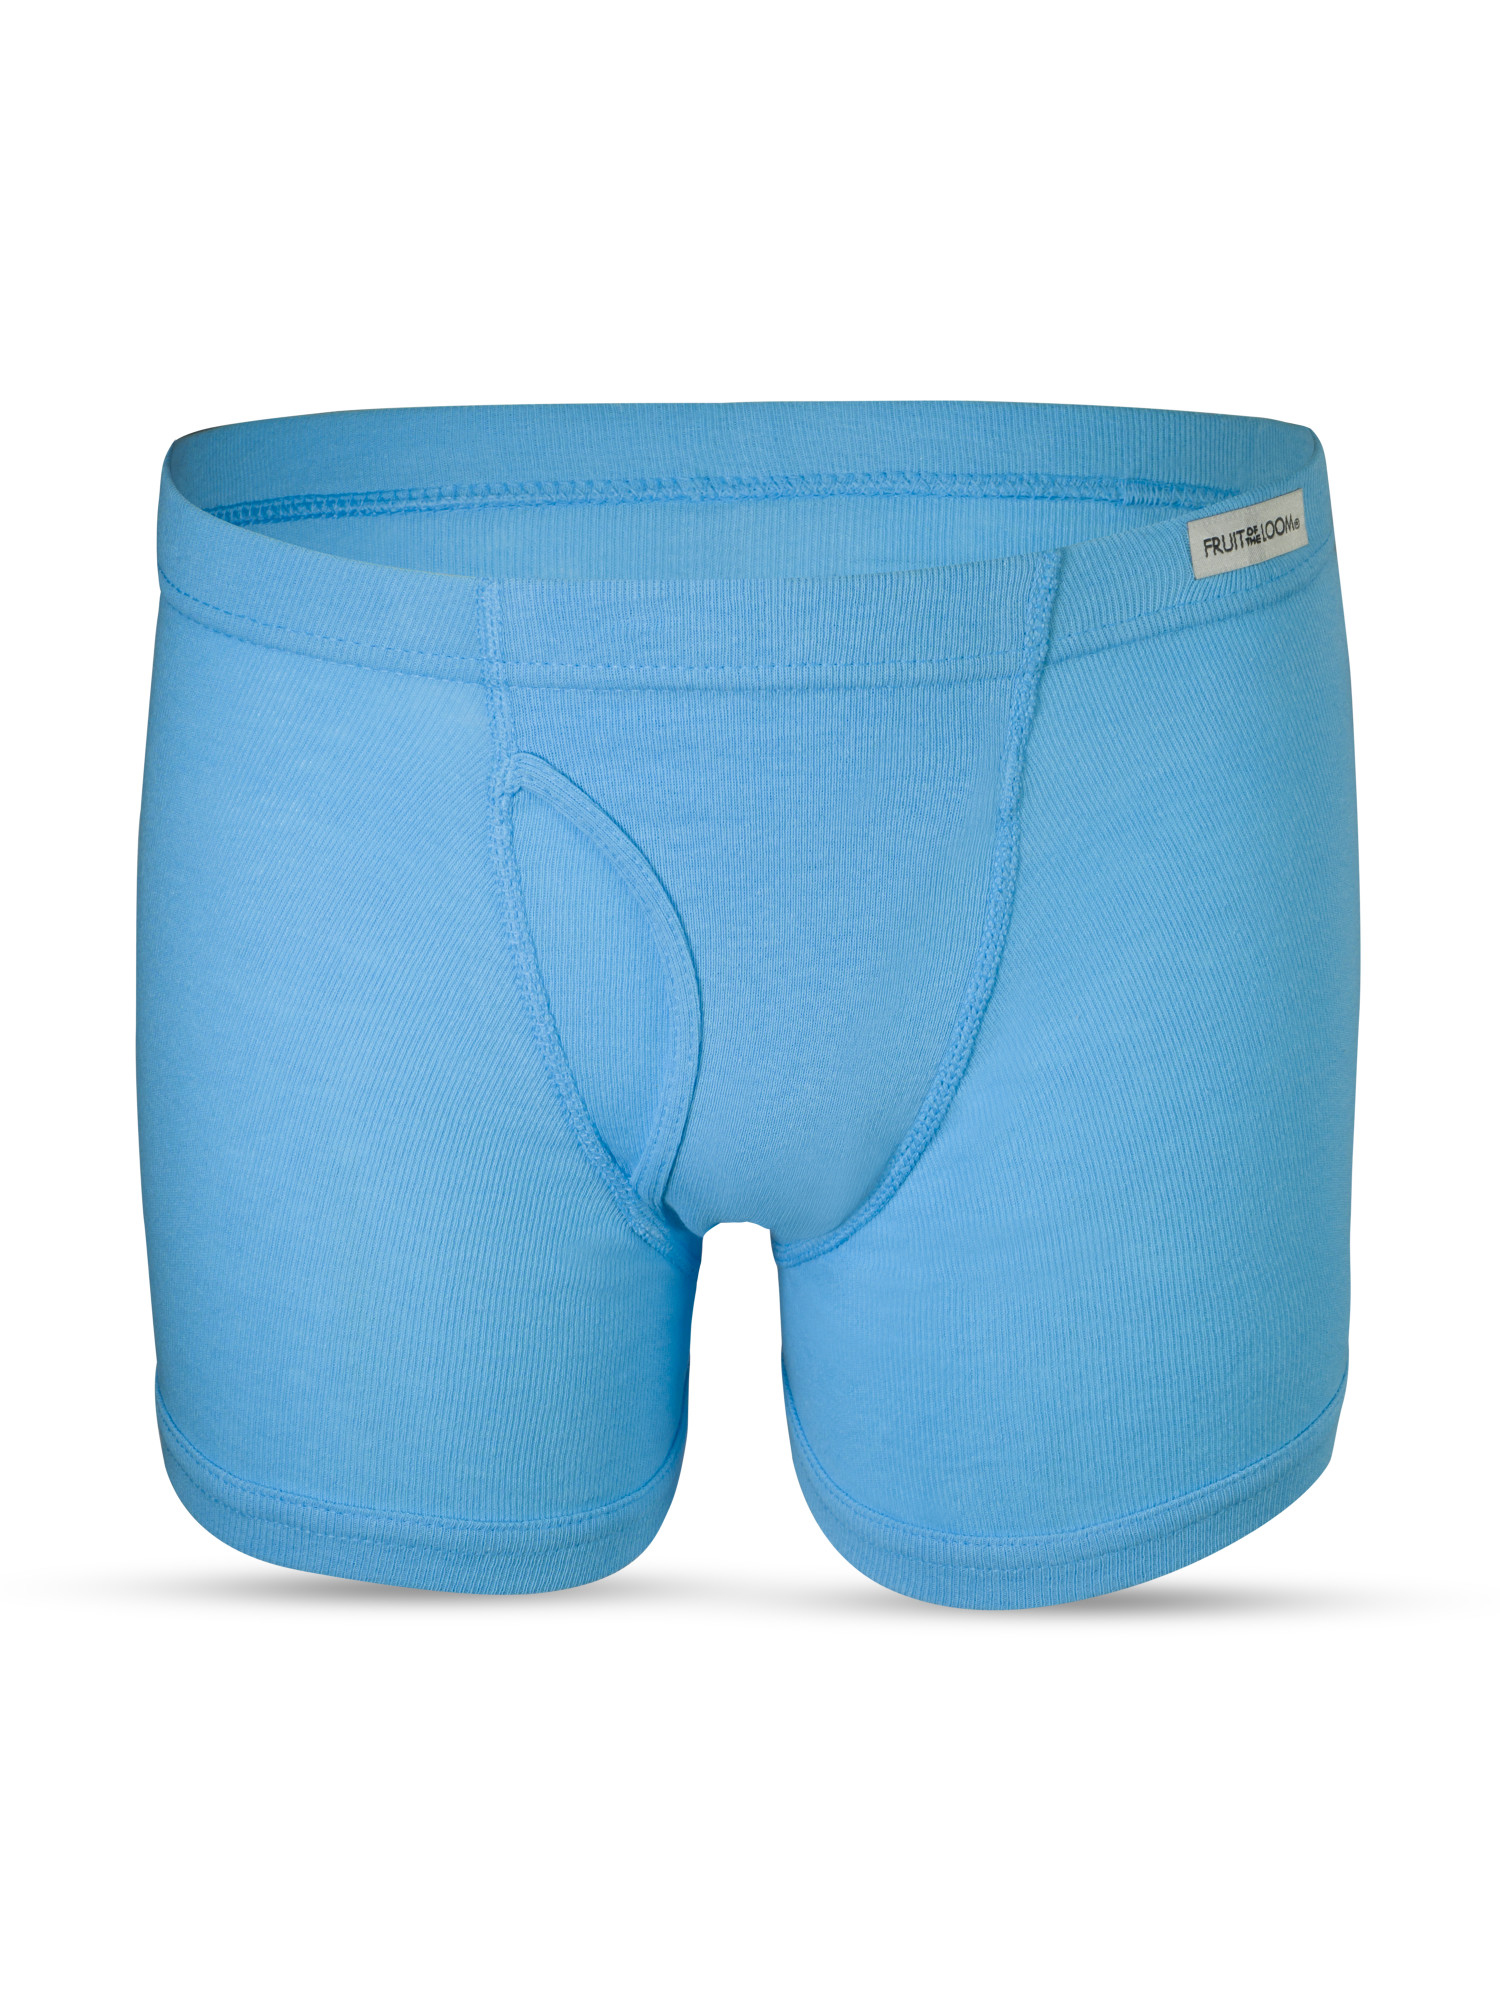 Fruit of the Loom Boys' Cotton Boxer Briefs, 7 Pack - image 3 of 6